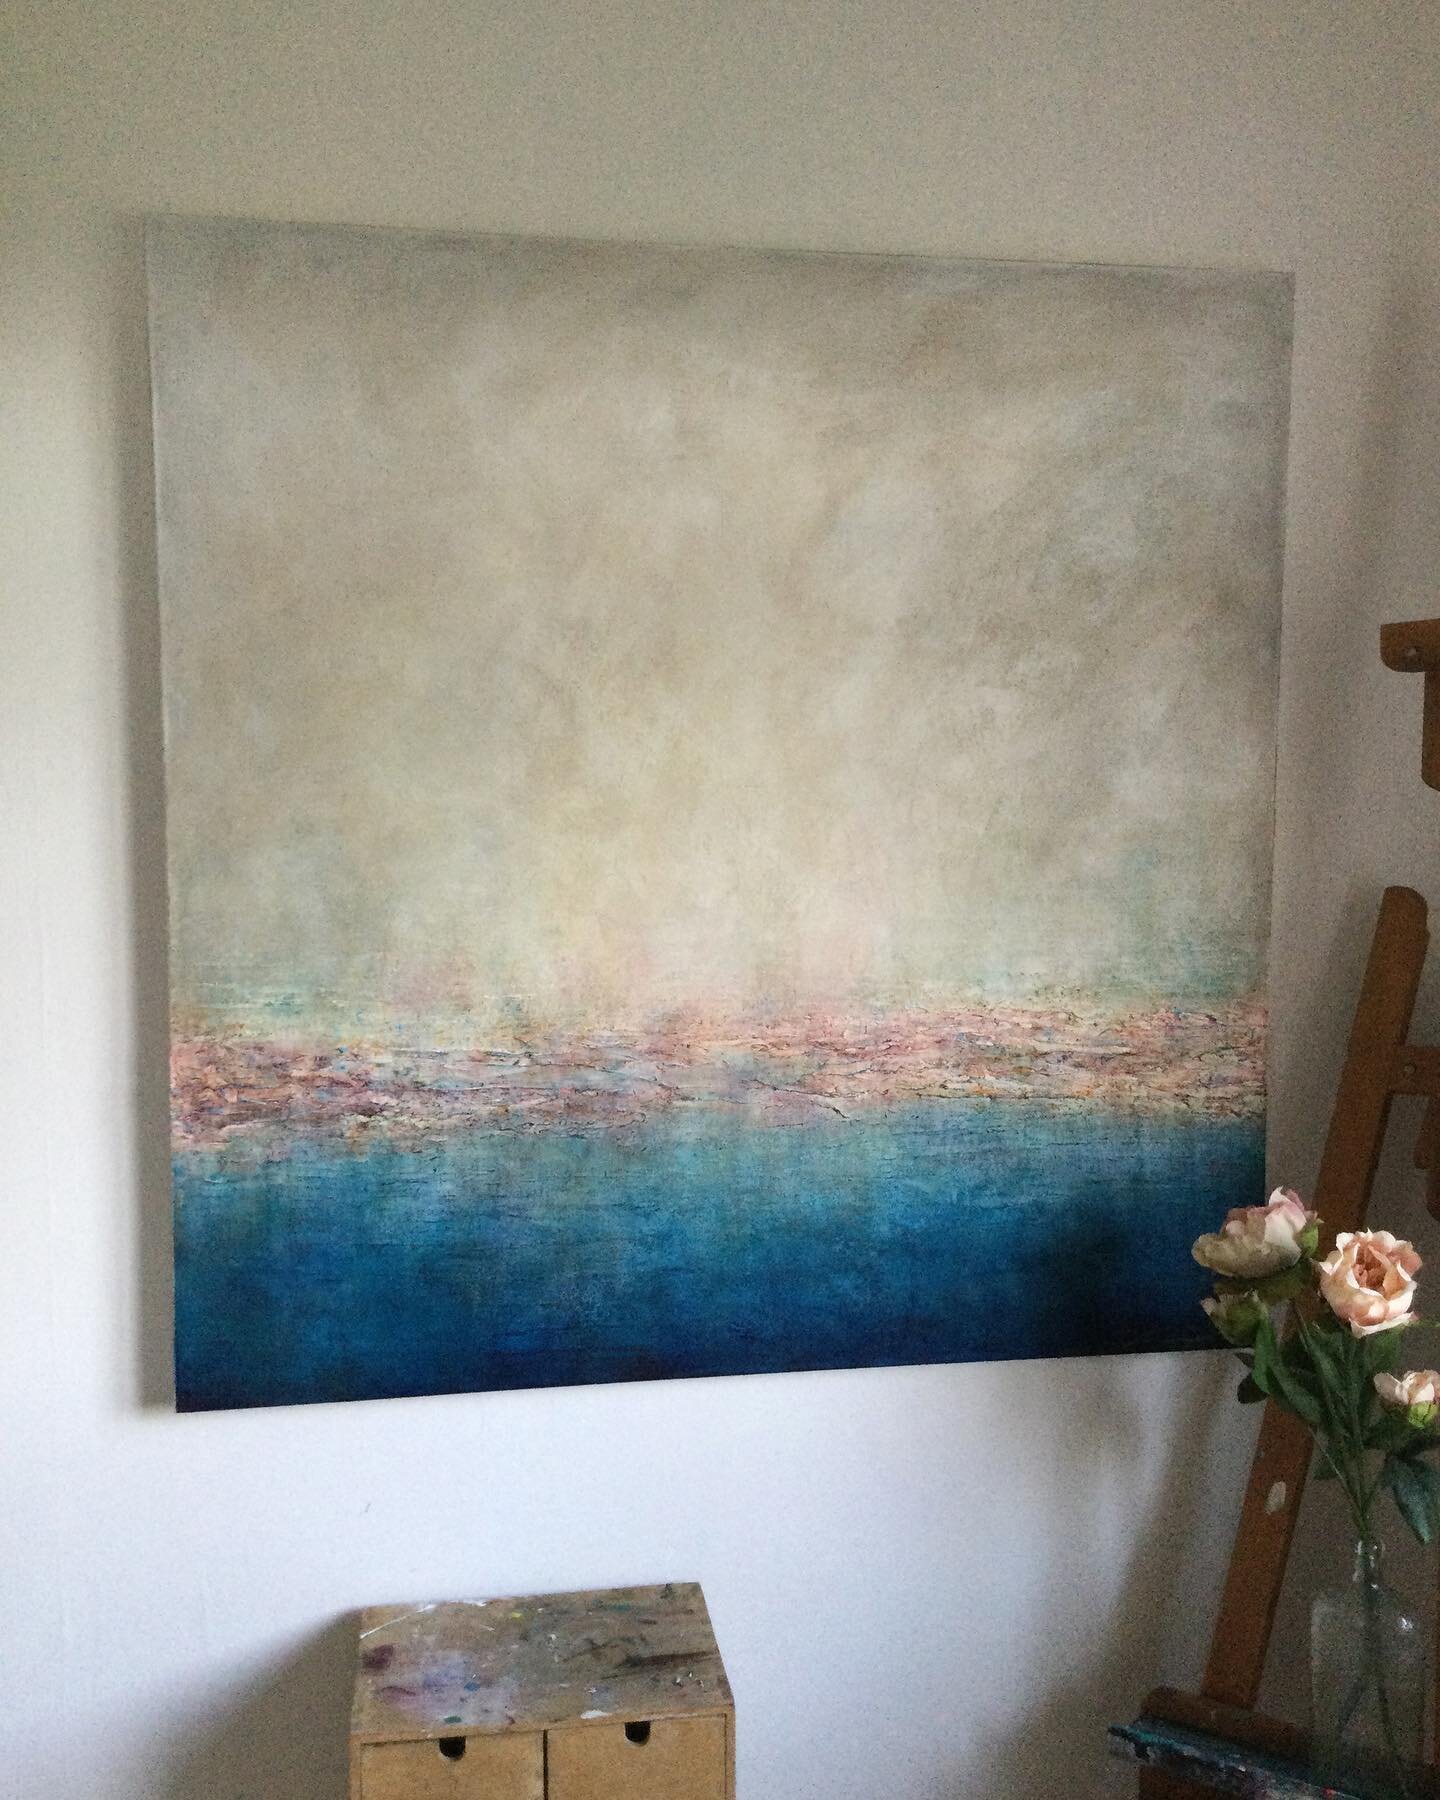 Delighted to be showing my work in this beautiful gallery @gallery_1608 

&lsquo;Distant Shore&rsquo; 100x100cm original painting on canvas available from the gallery now, see link in bio for more details.

#contemporarypainting #art #painting #canva